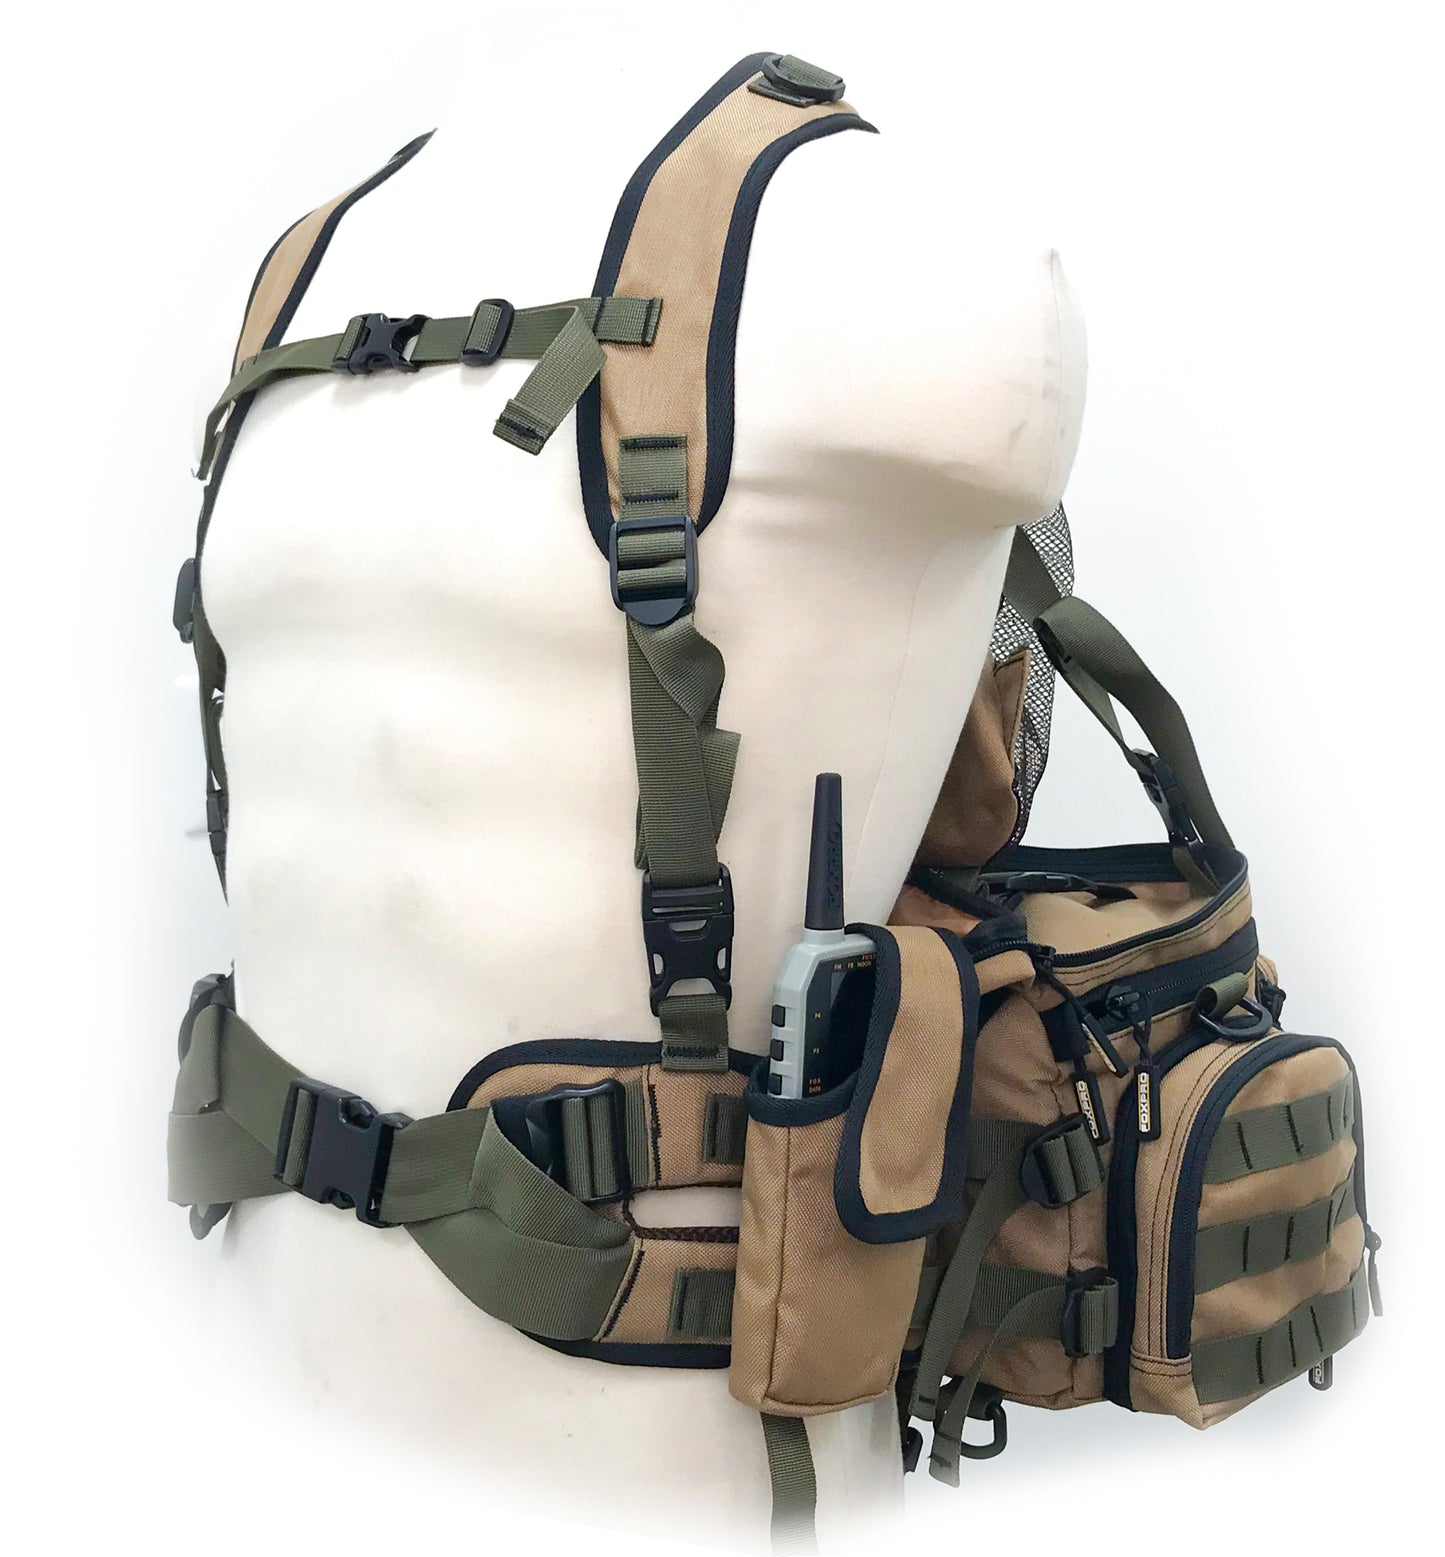 FoxPro | Scout Pack